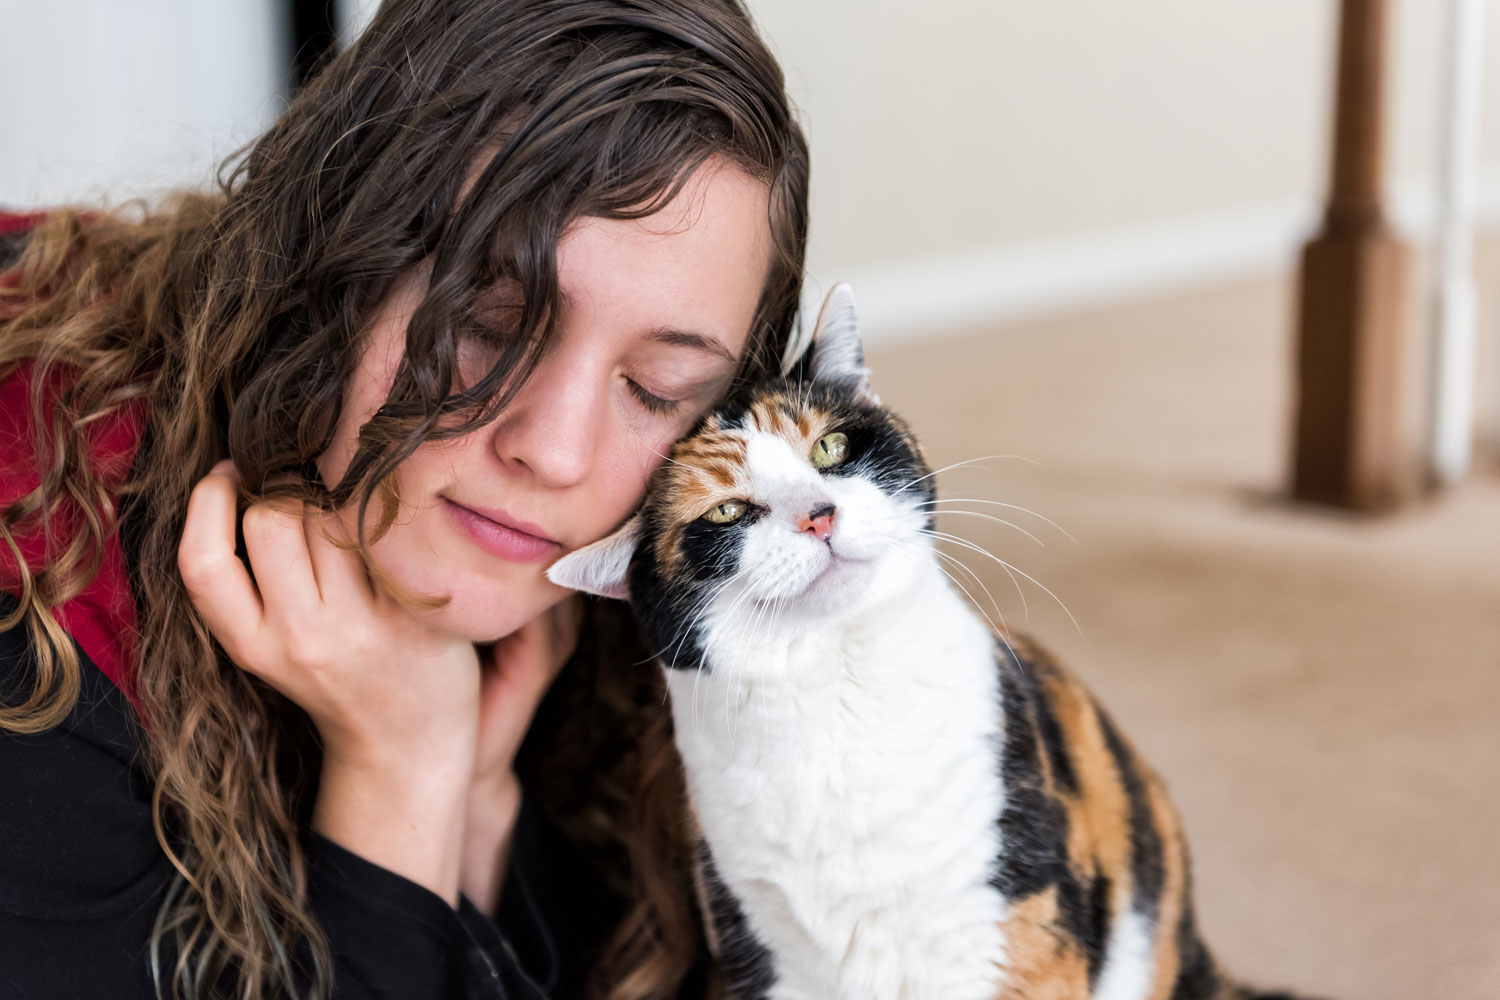 A woman placing her head next to a cat and the cat is rubbing on her face